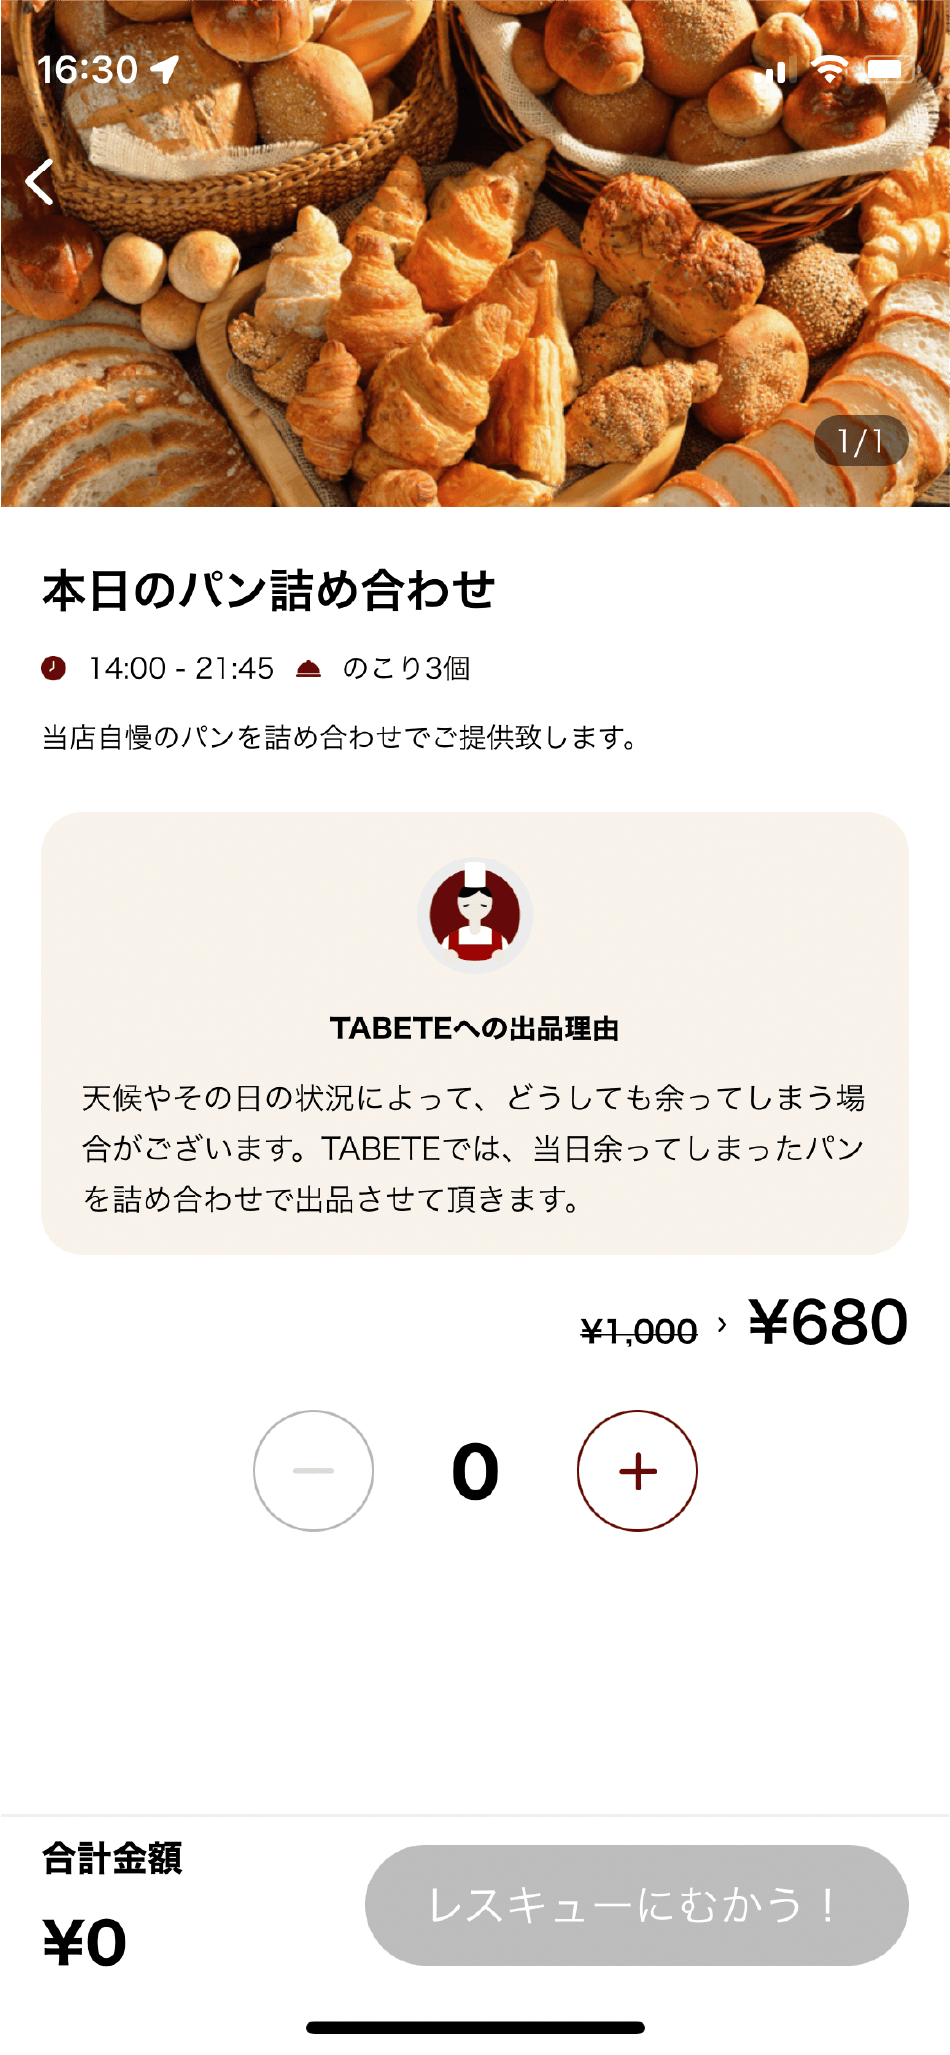 「TABETE」のイメージ画面2